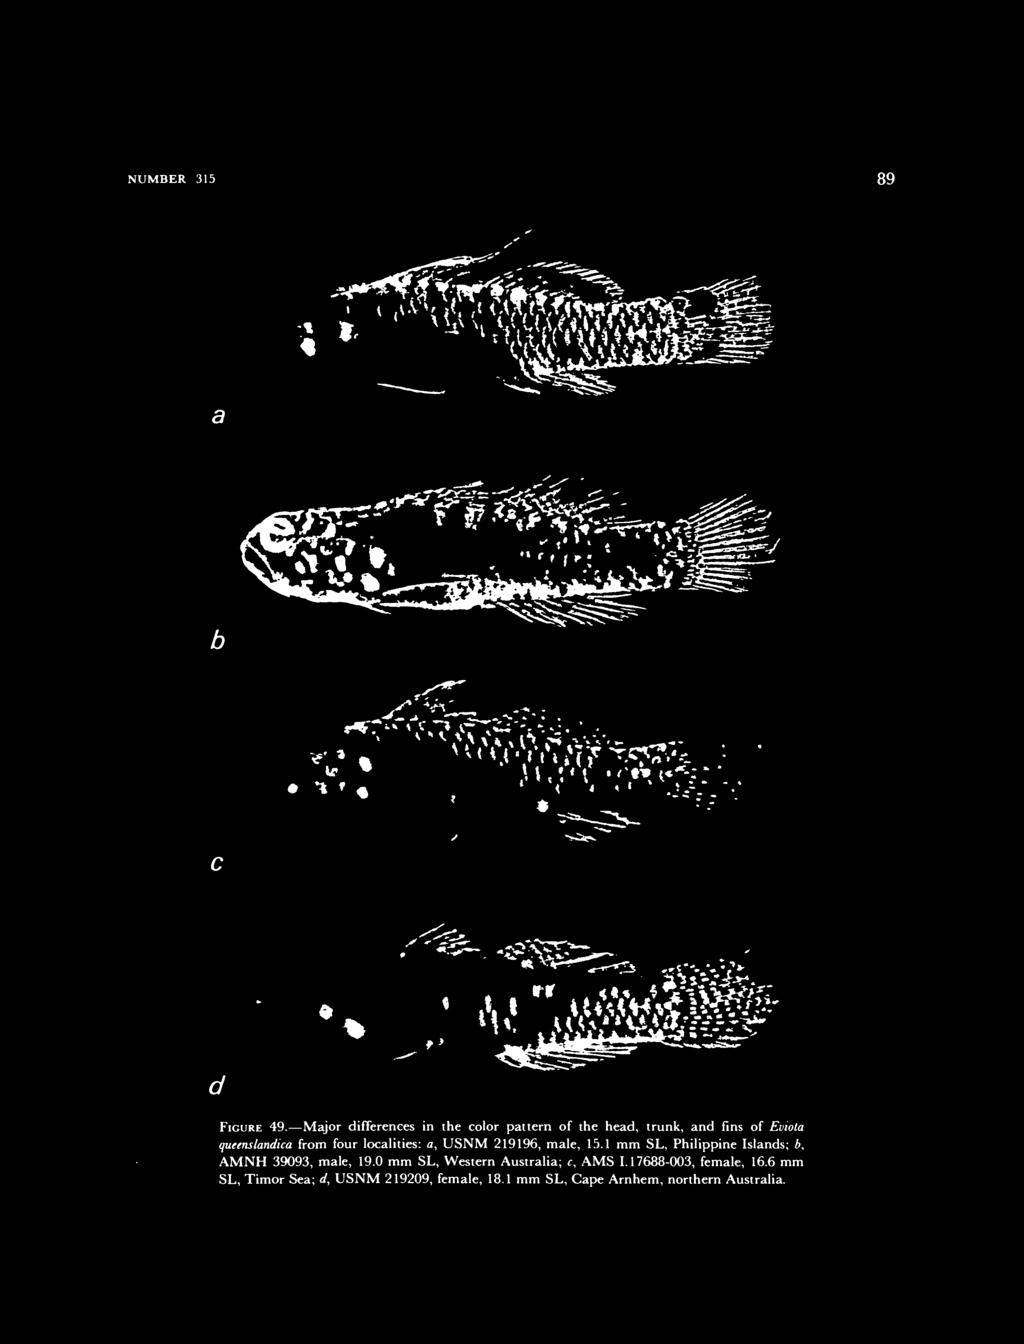 NUMBER 5 89 FIGURE 49. Major differences in the color pattern of the head, trunk, and fins of Evwta queens landica from four localities: a, USNM 996, male, 5.